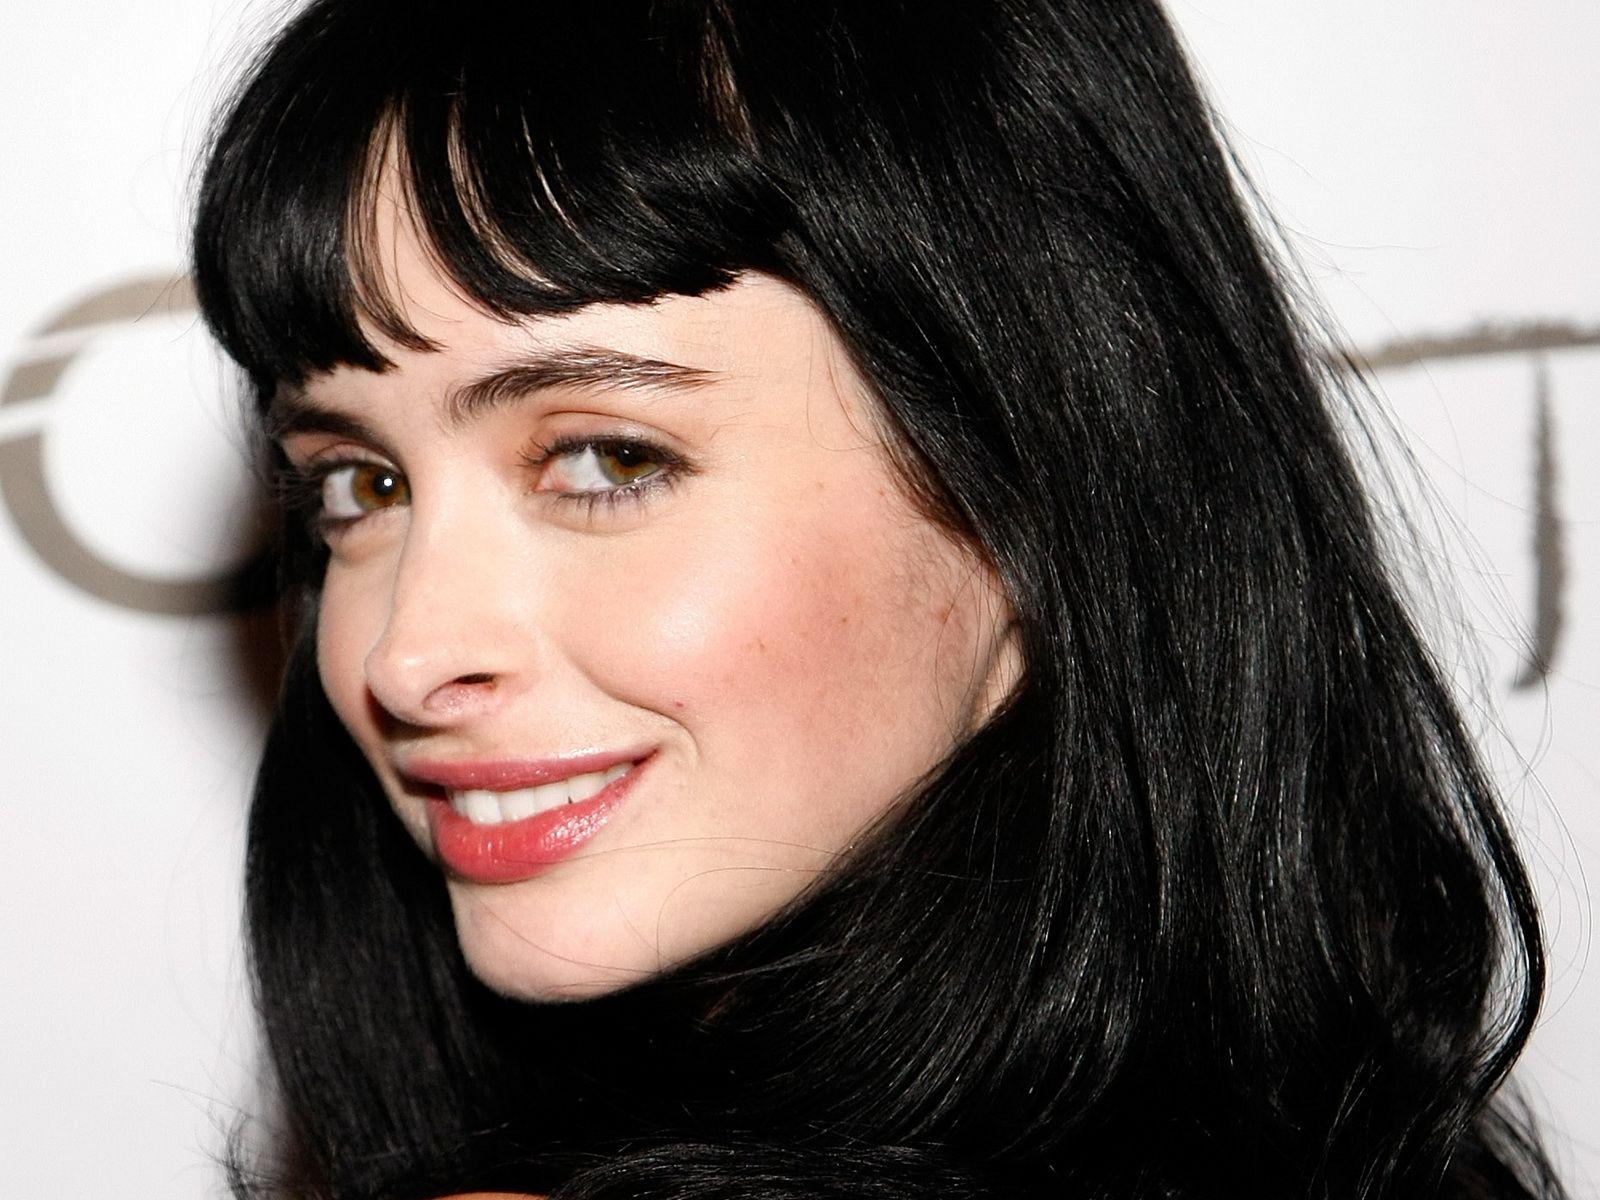 Krysten Ritter as Selina Kyle / Catwoman. If I were casting superher